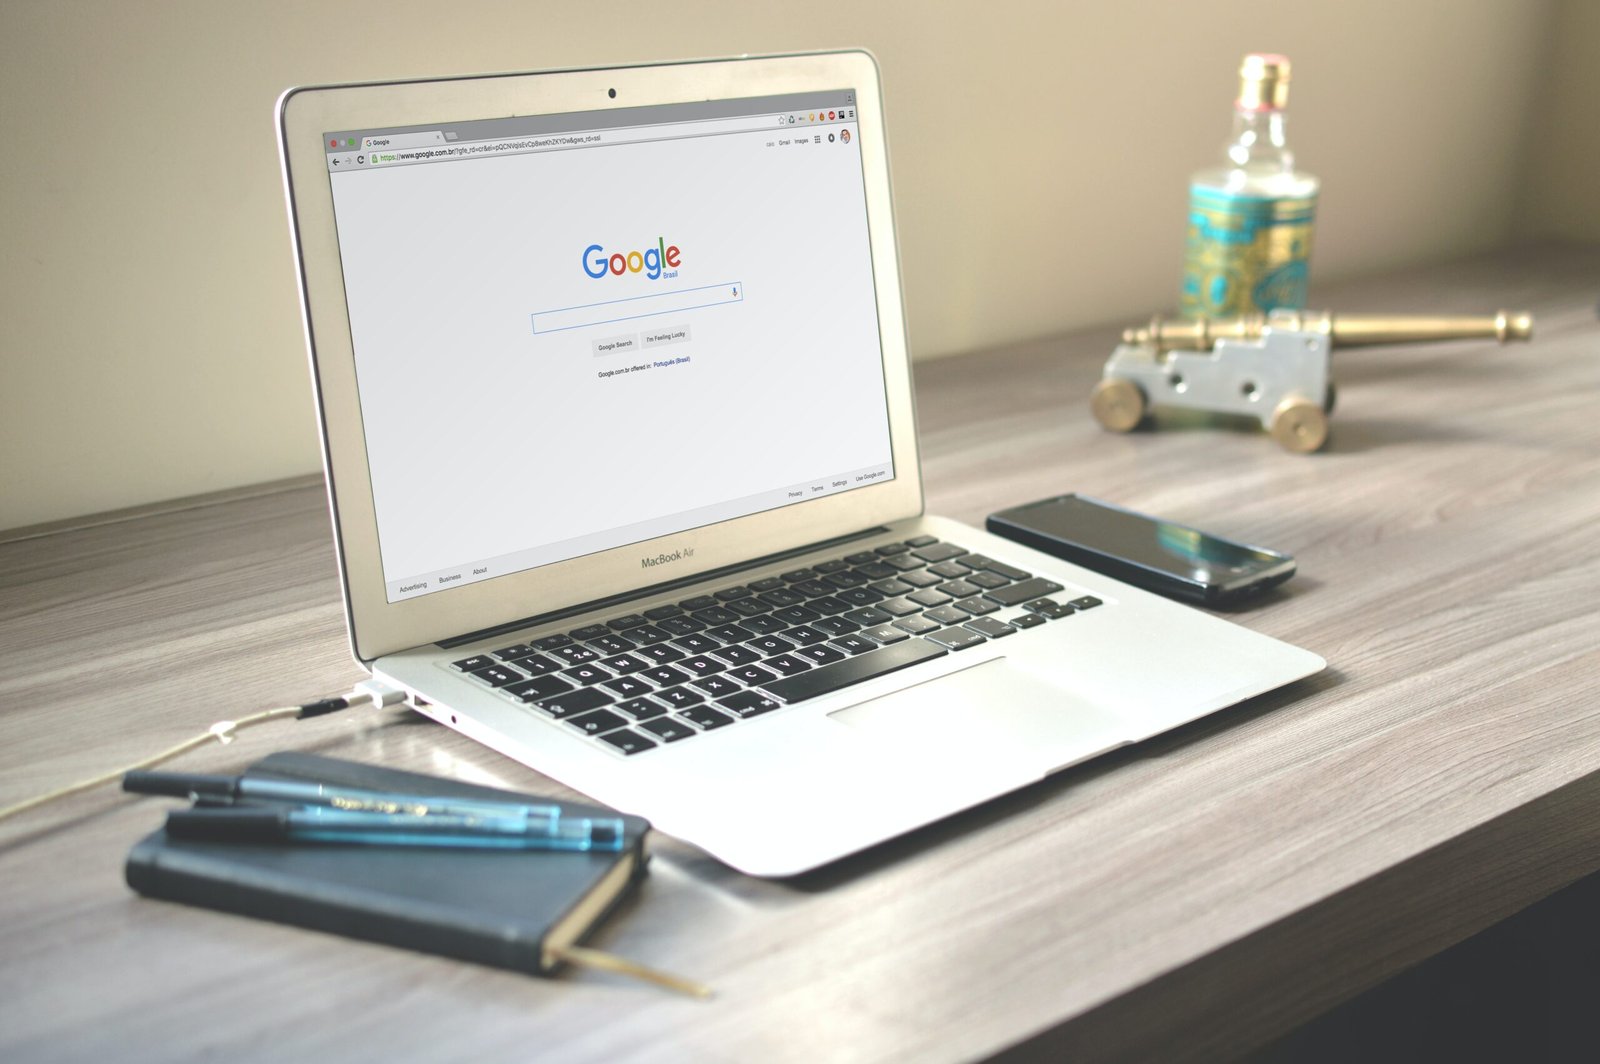 This is a guide on the best ways for lawyers to improve rankings in search engines through their websites. Check out our list of hacks and tips!